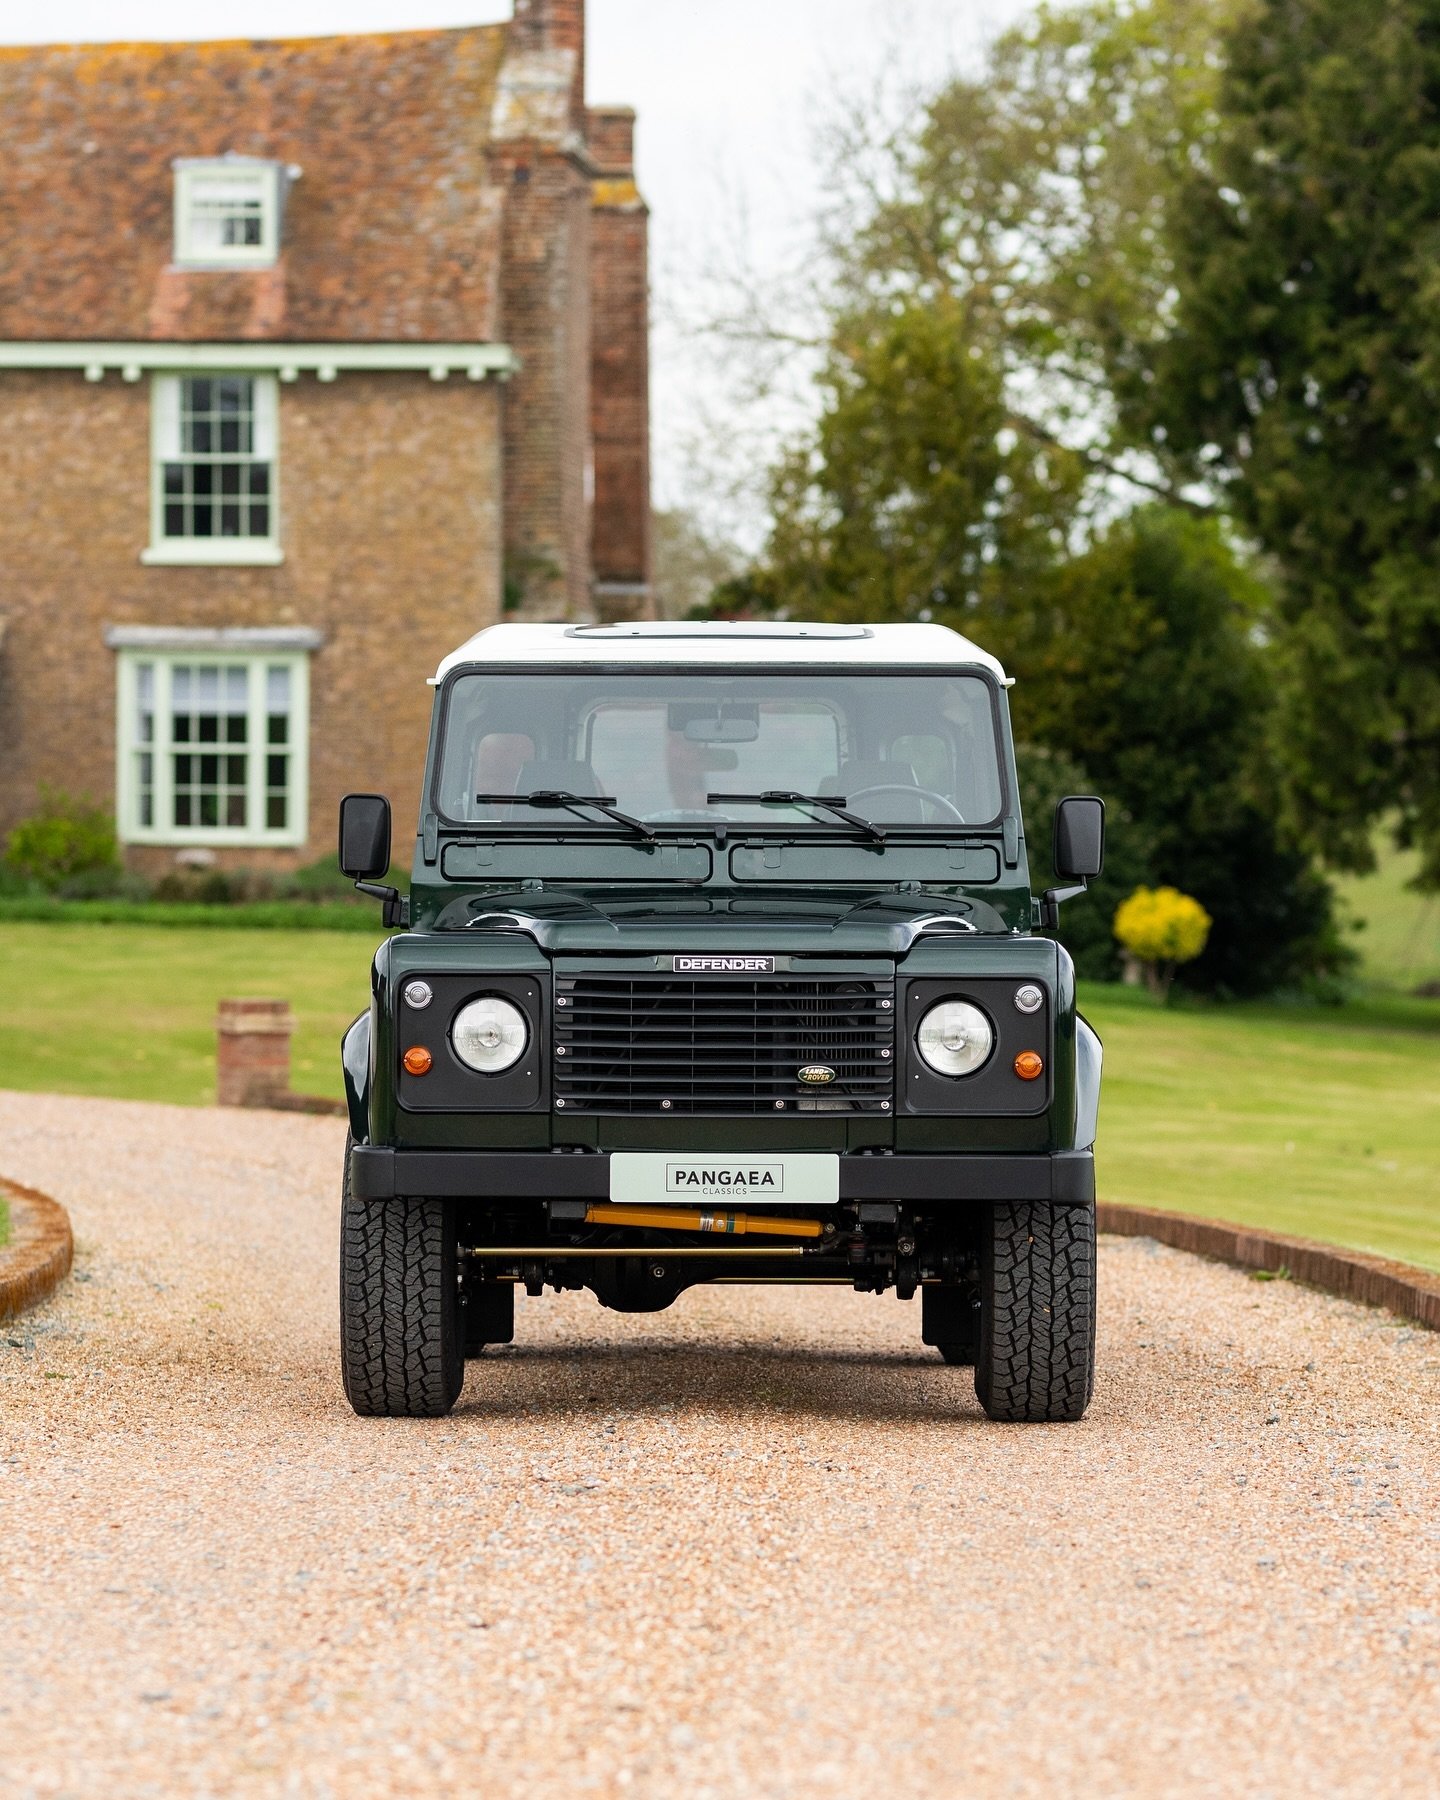 Happy World Land Rover Day!

There&rsquo;s no better Defender to celebrate with than our &lsquo;98 Highlander Edition Defender 90!

All the info is our website!

#landroverdefender #defender #landroverdefender90 #landroverdefender110 #defender90 #cus